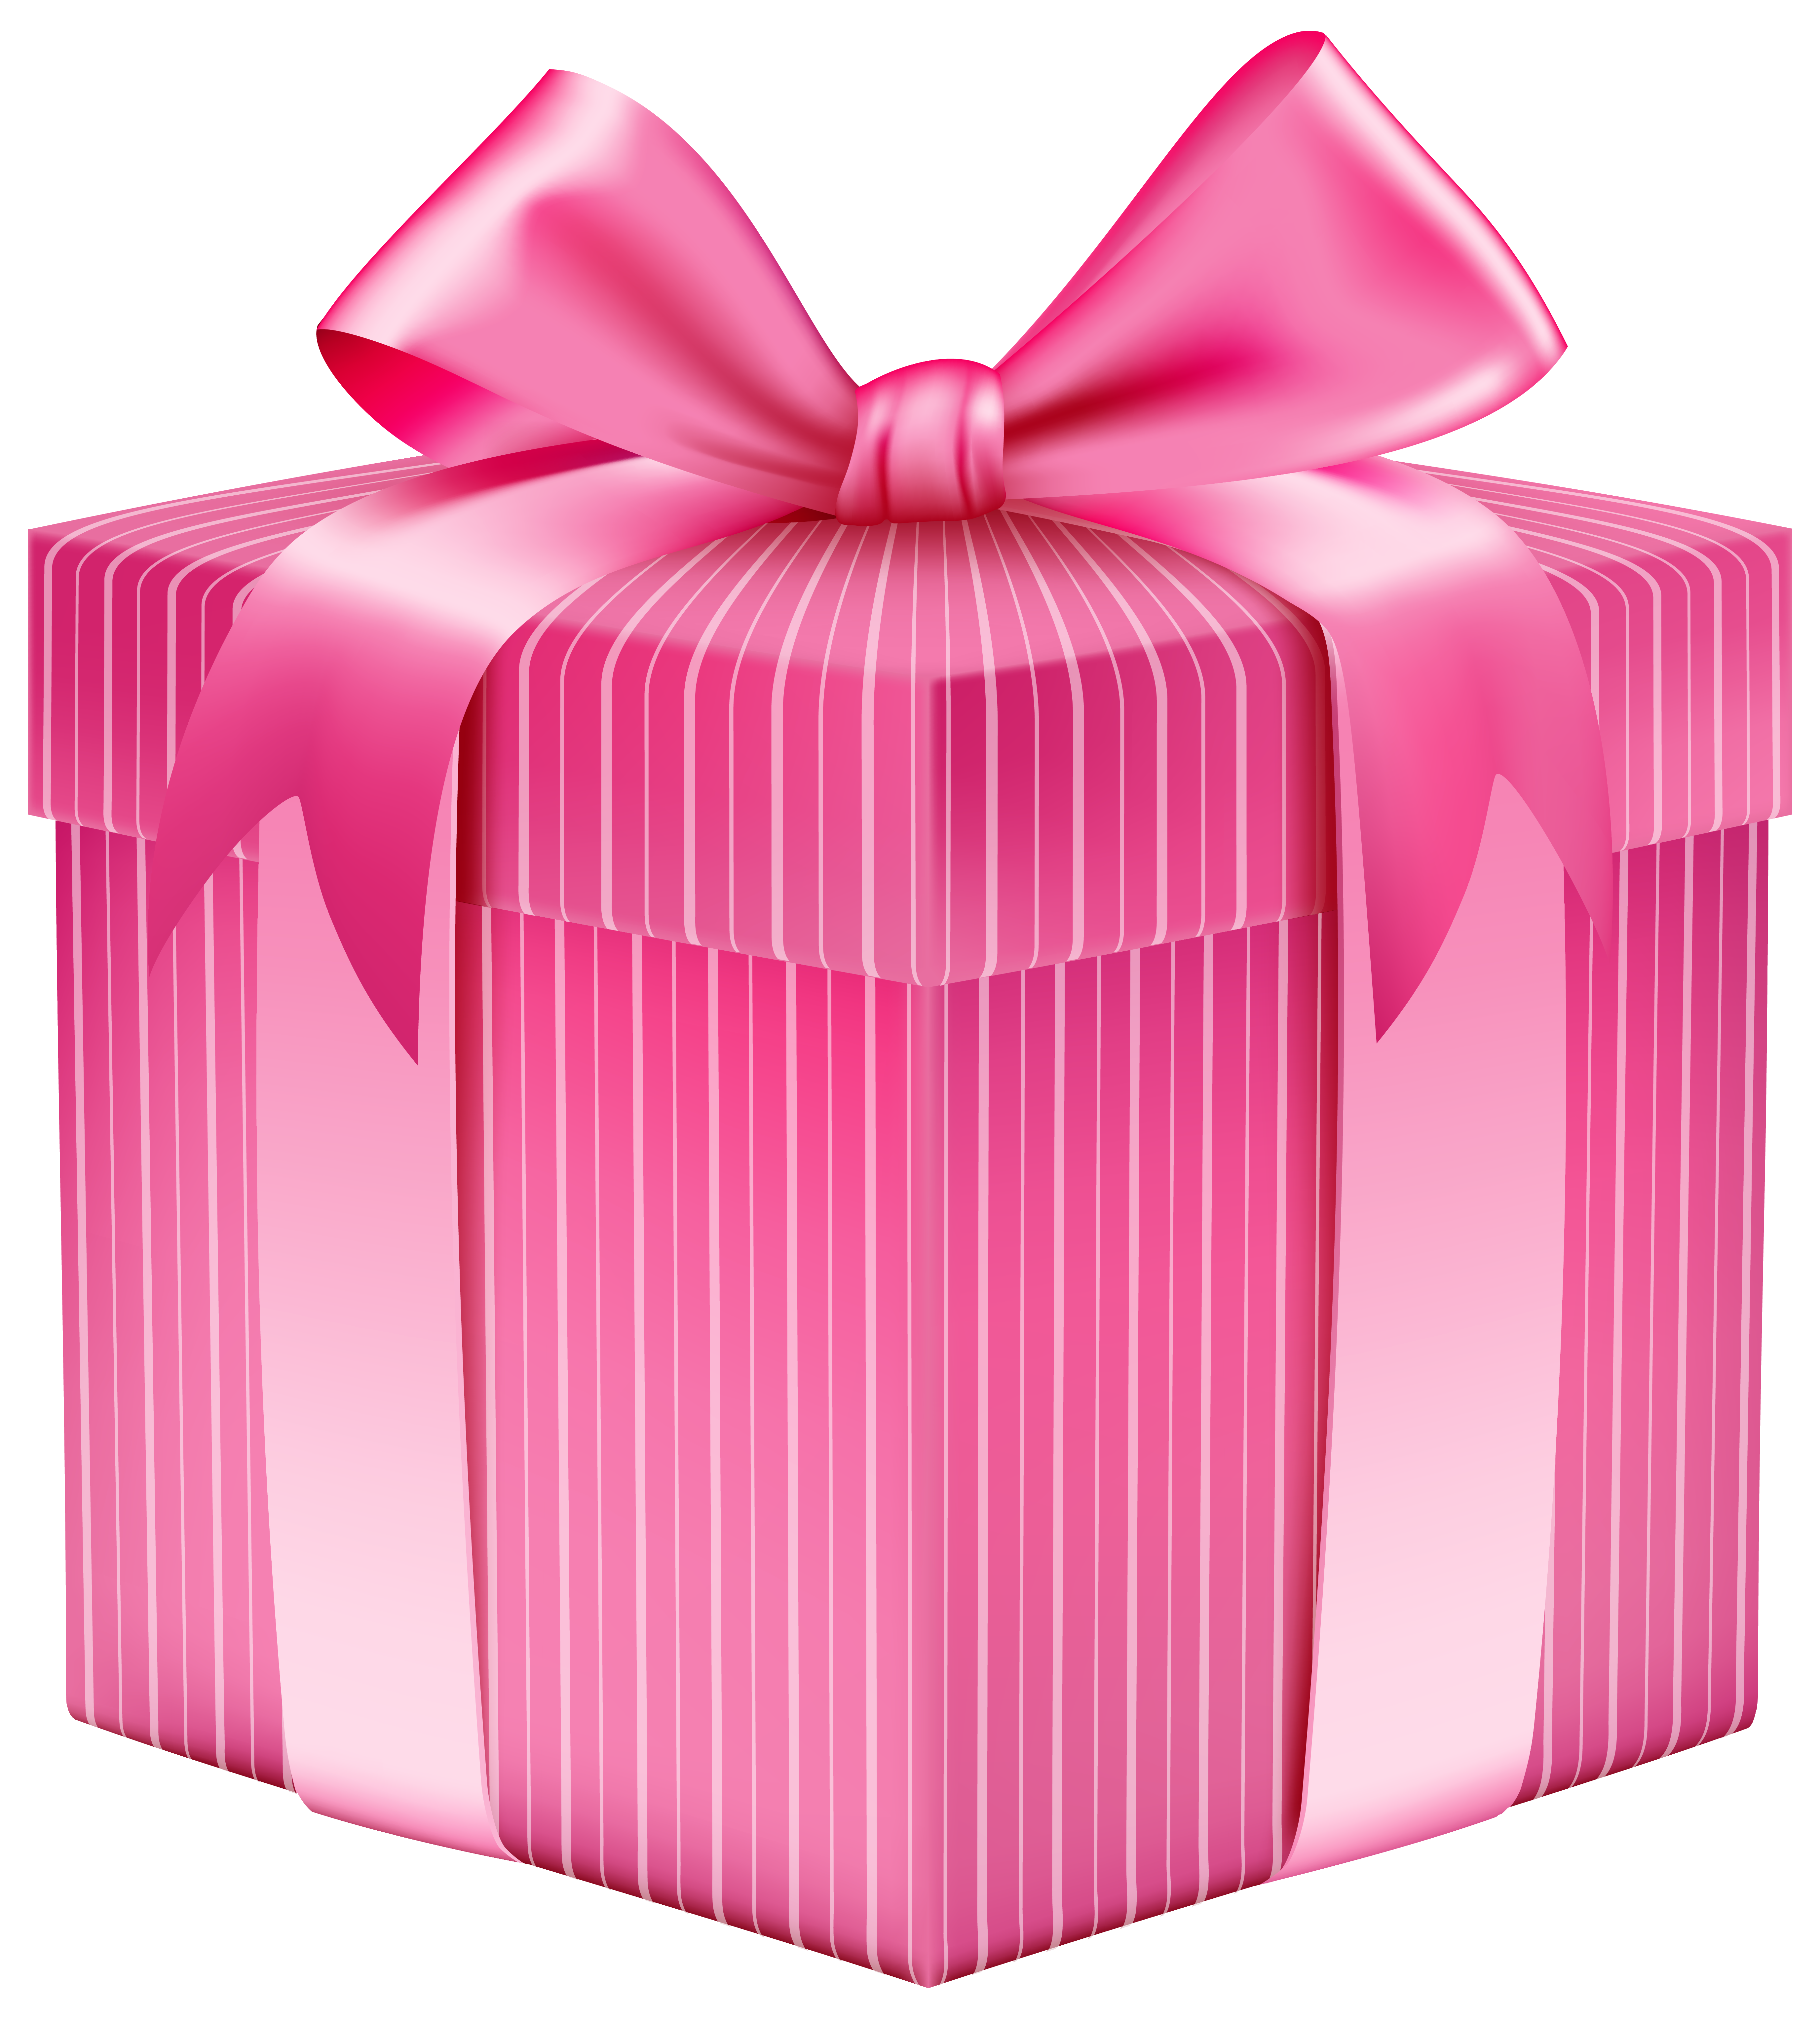 free clipart images gift boxes - photo #36